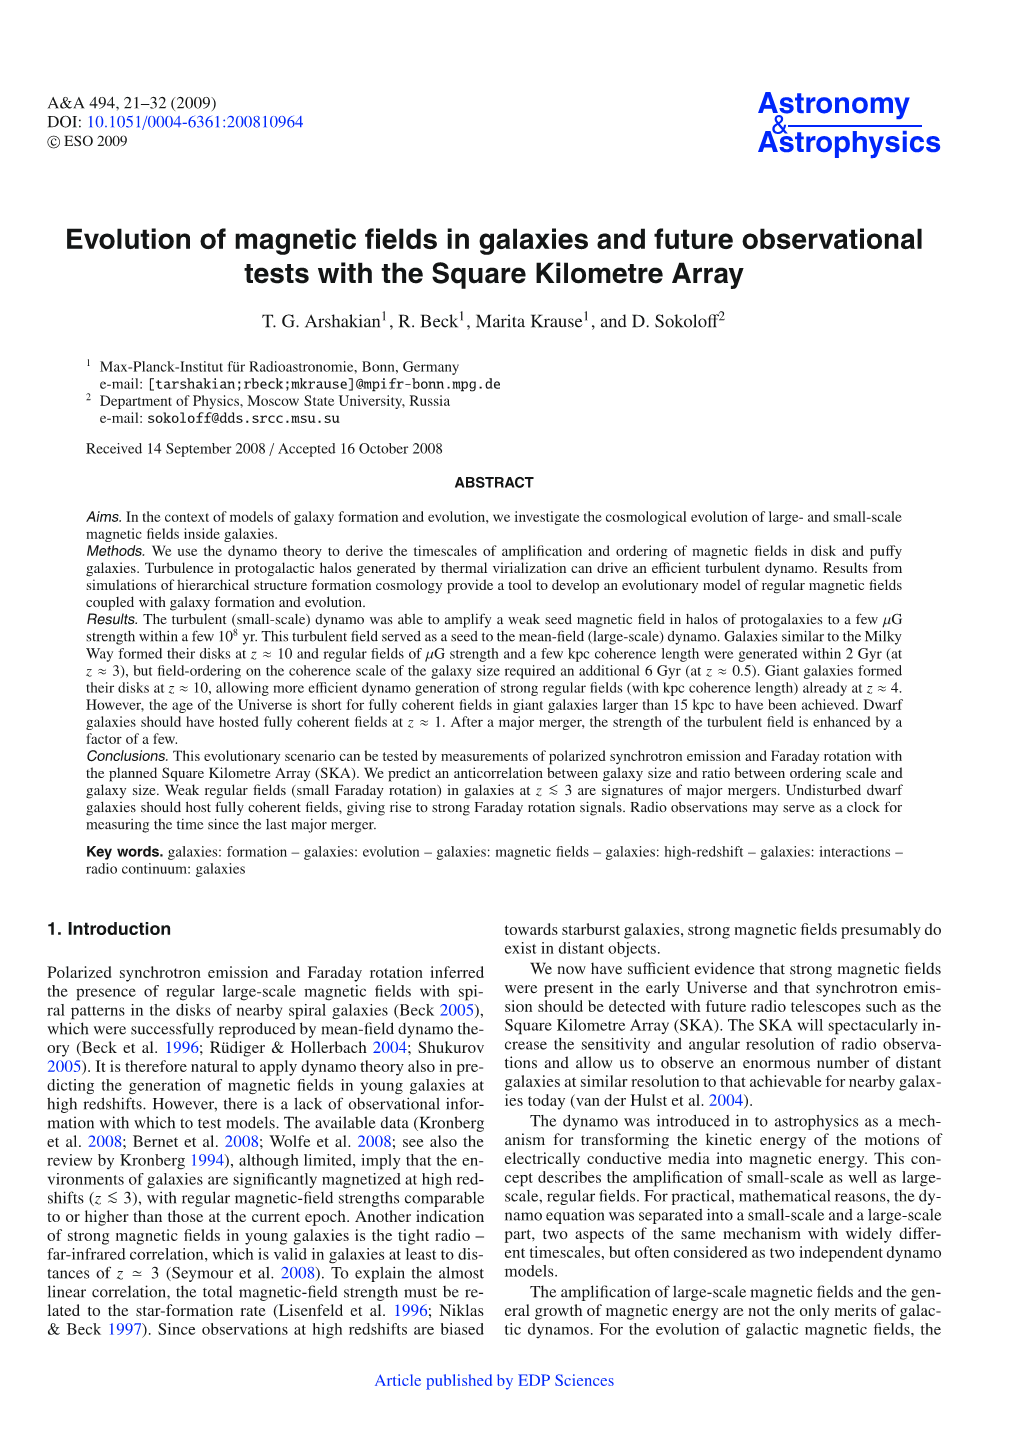 Evolution of Magnetic Fields in Galaxies and Future Observational